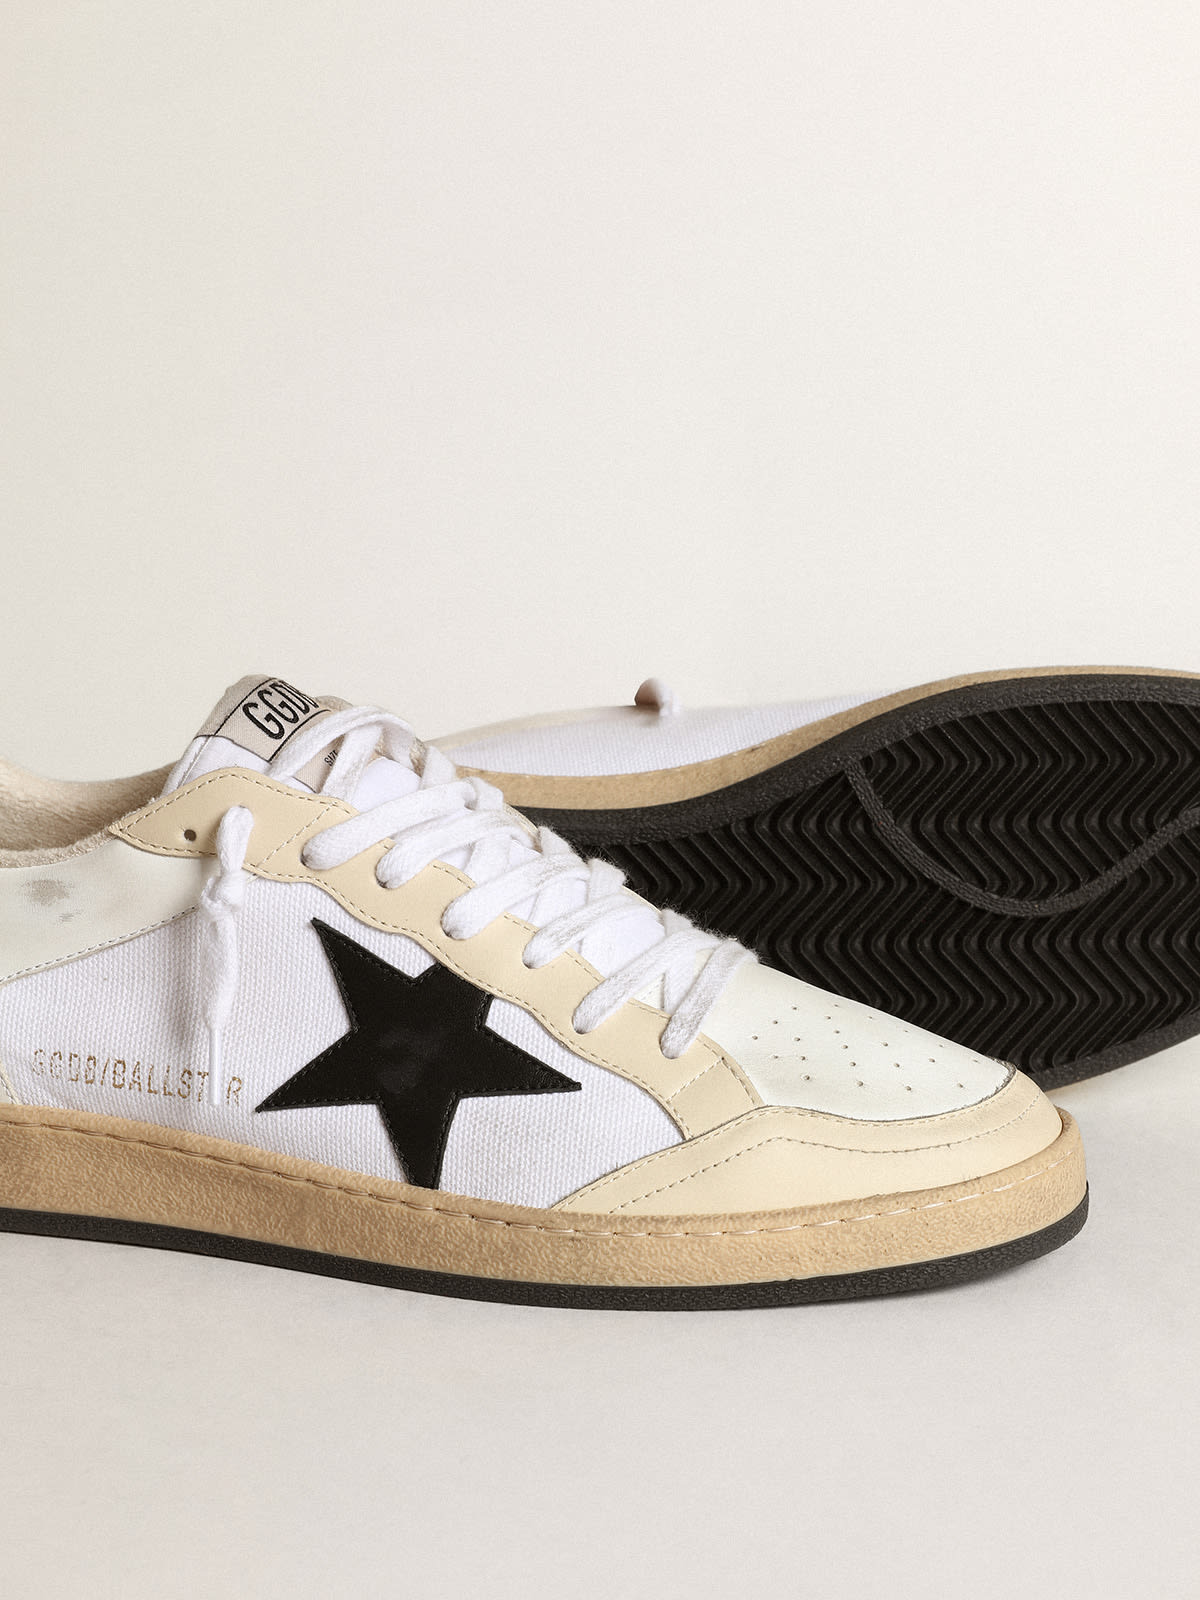 Golden Goose - Men’s Ball Star sneakers in white canvas and leather with ivory leather inserts and black nappa leather star in 